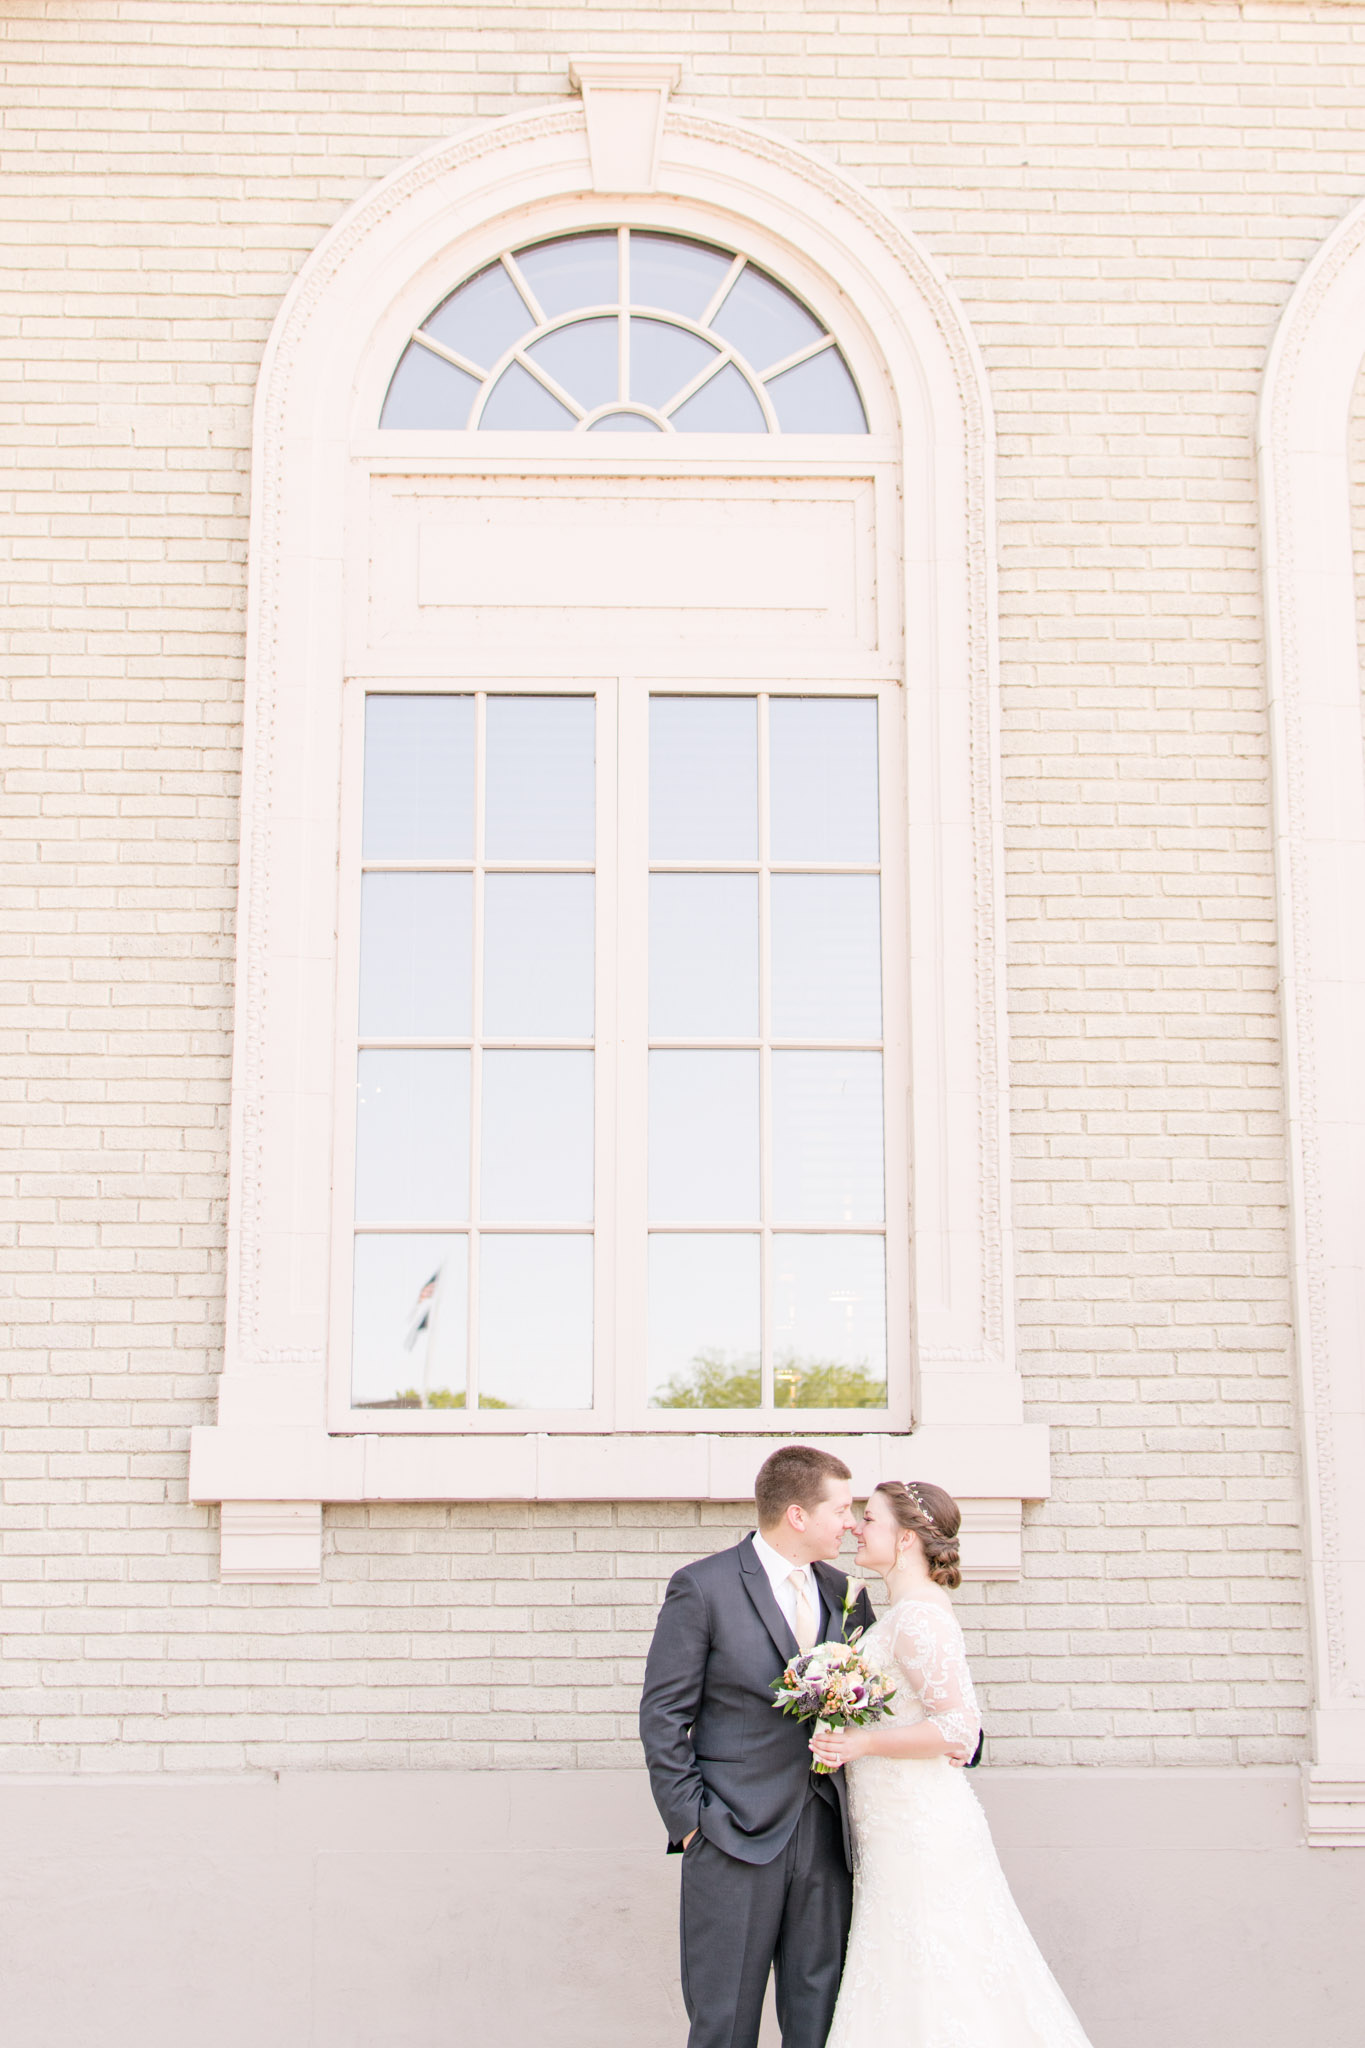 Bride and groom pose in front of large window